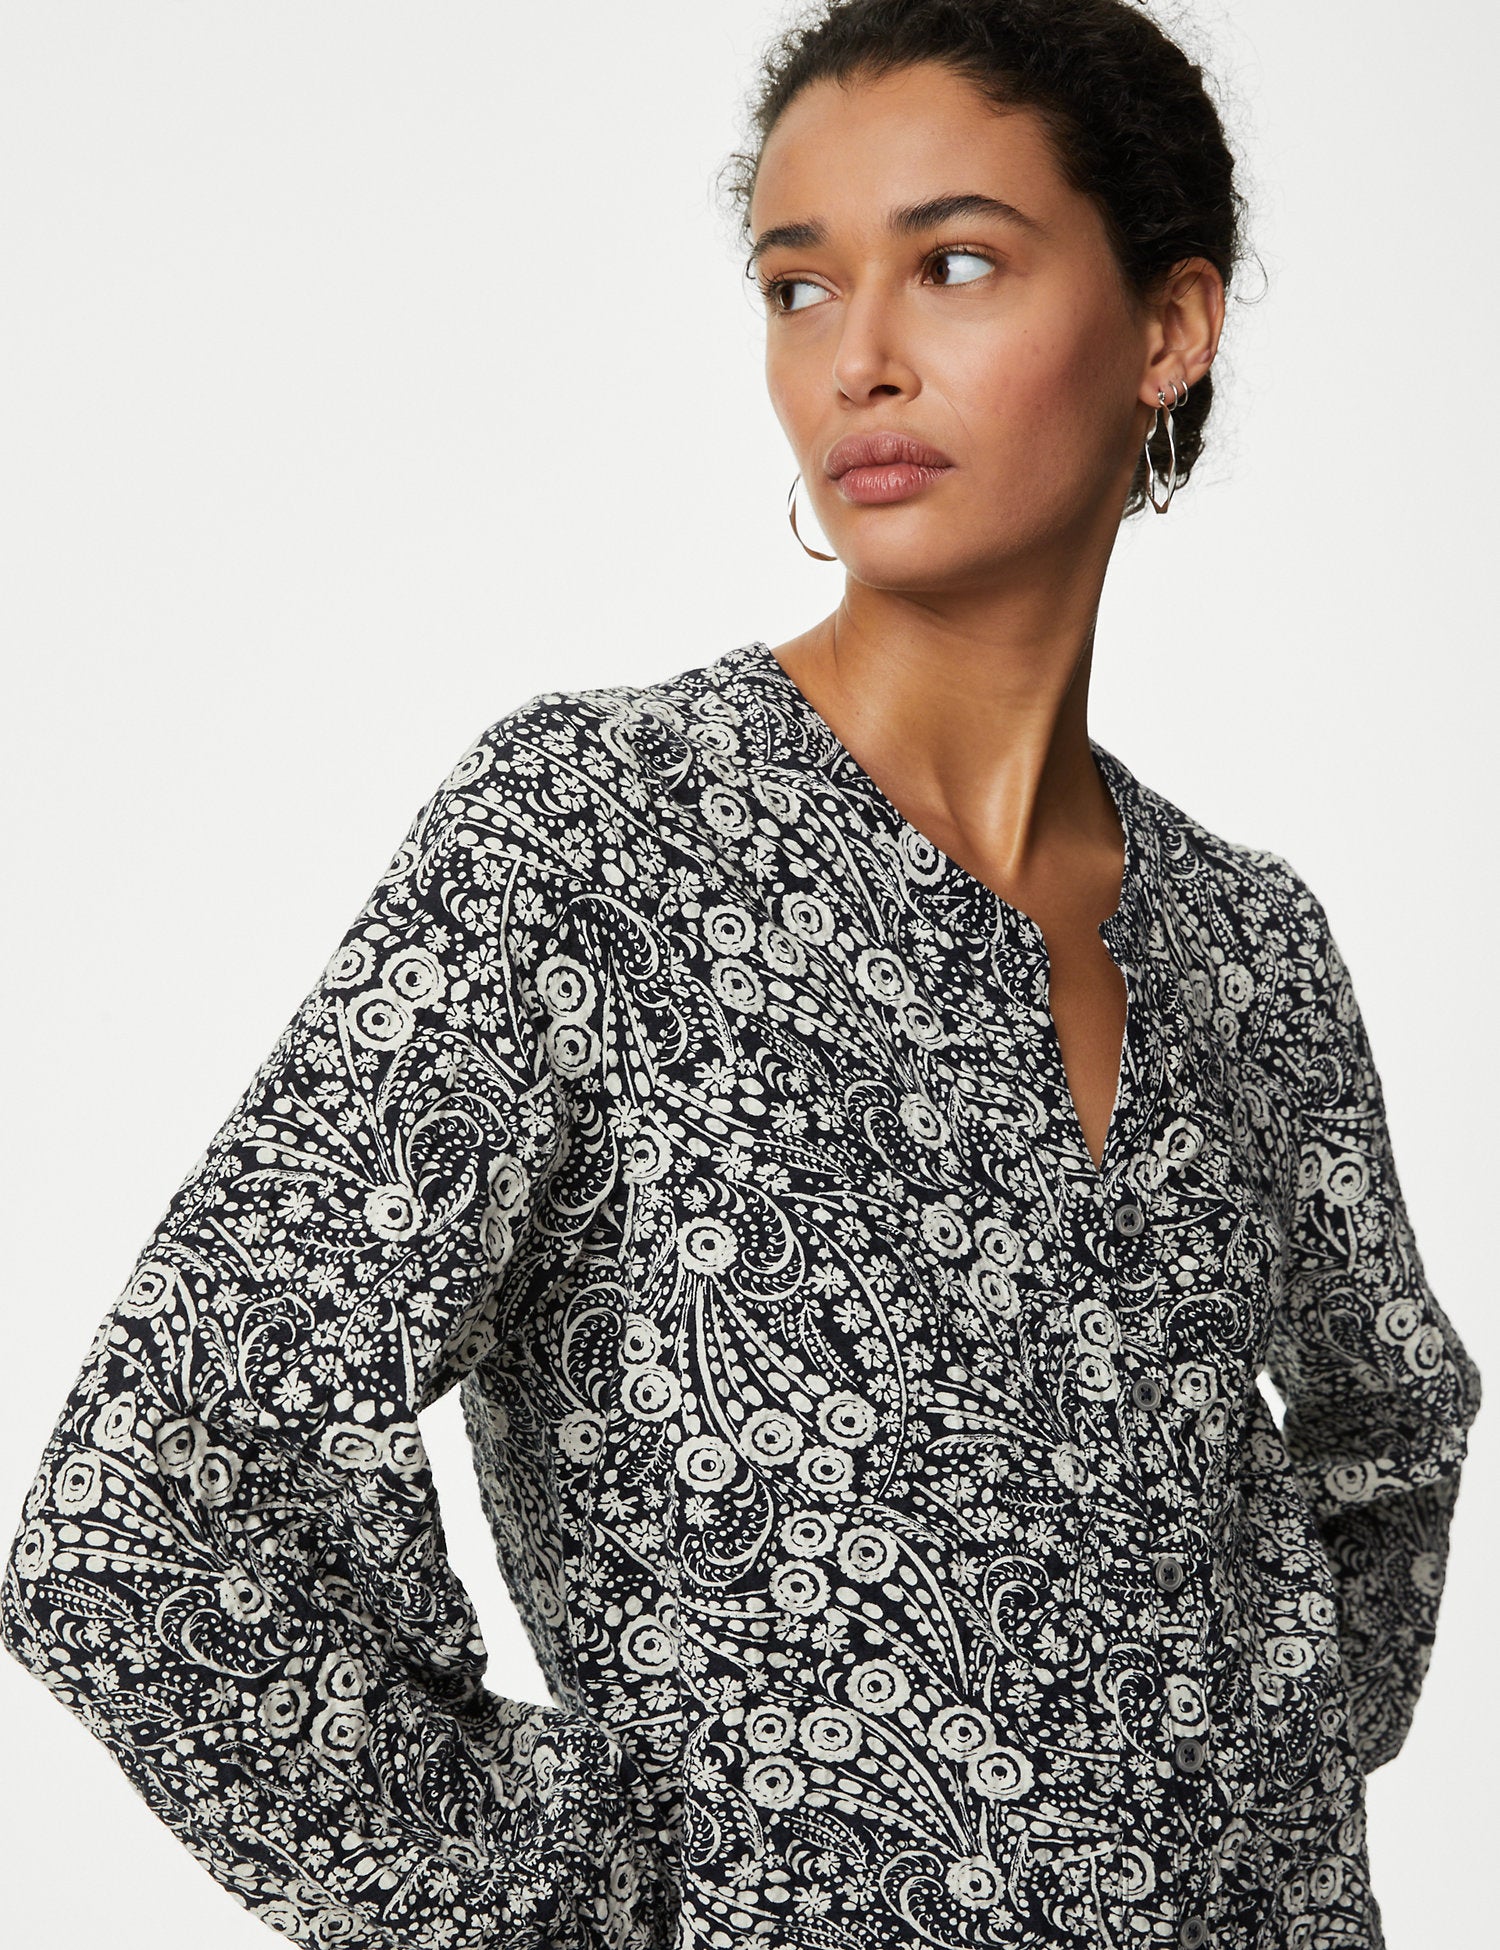 Cotton Rich Printed Textured Blouse